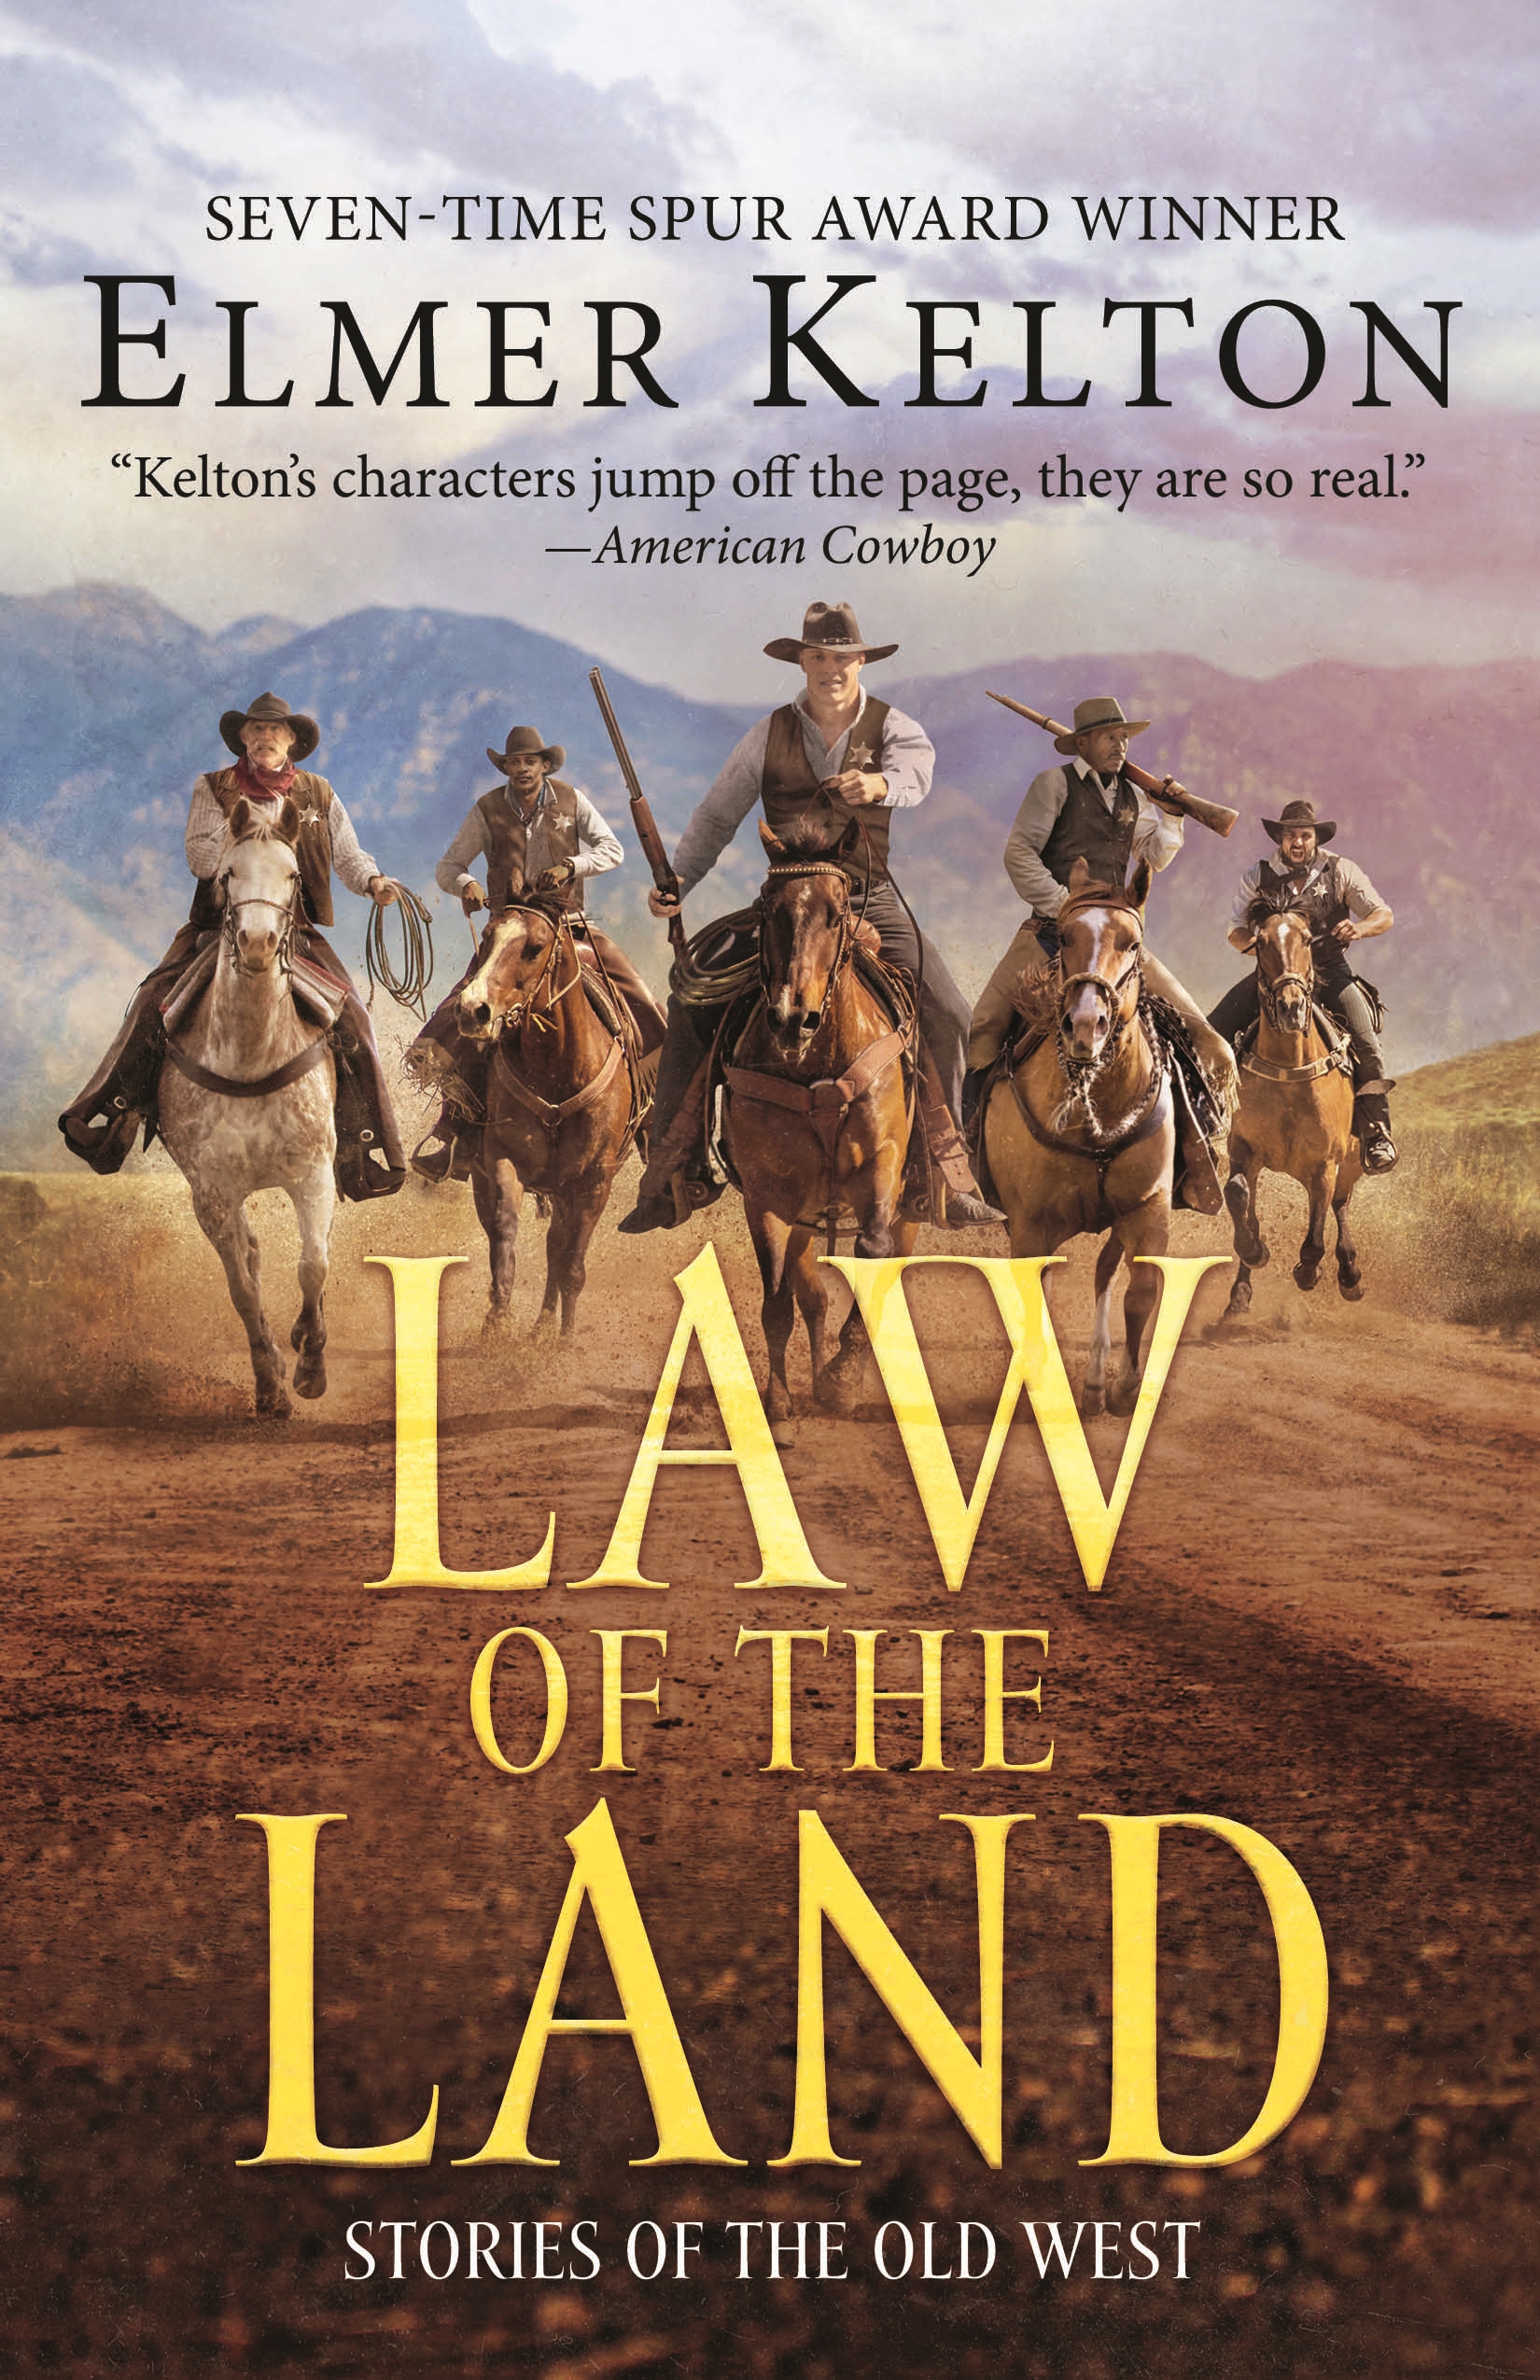 Law of the Land : Stories of the Old West by Elmer Kelton